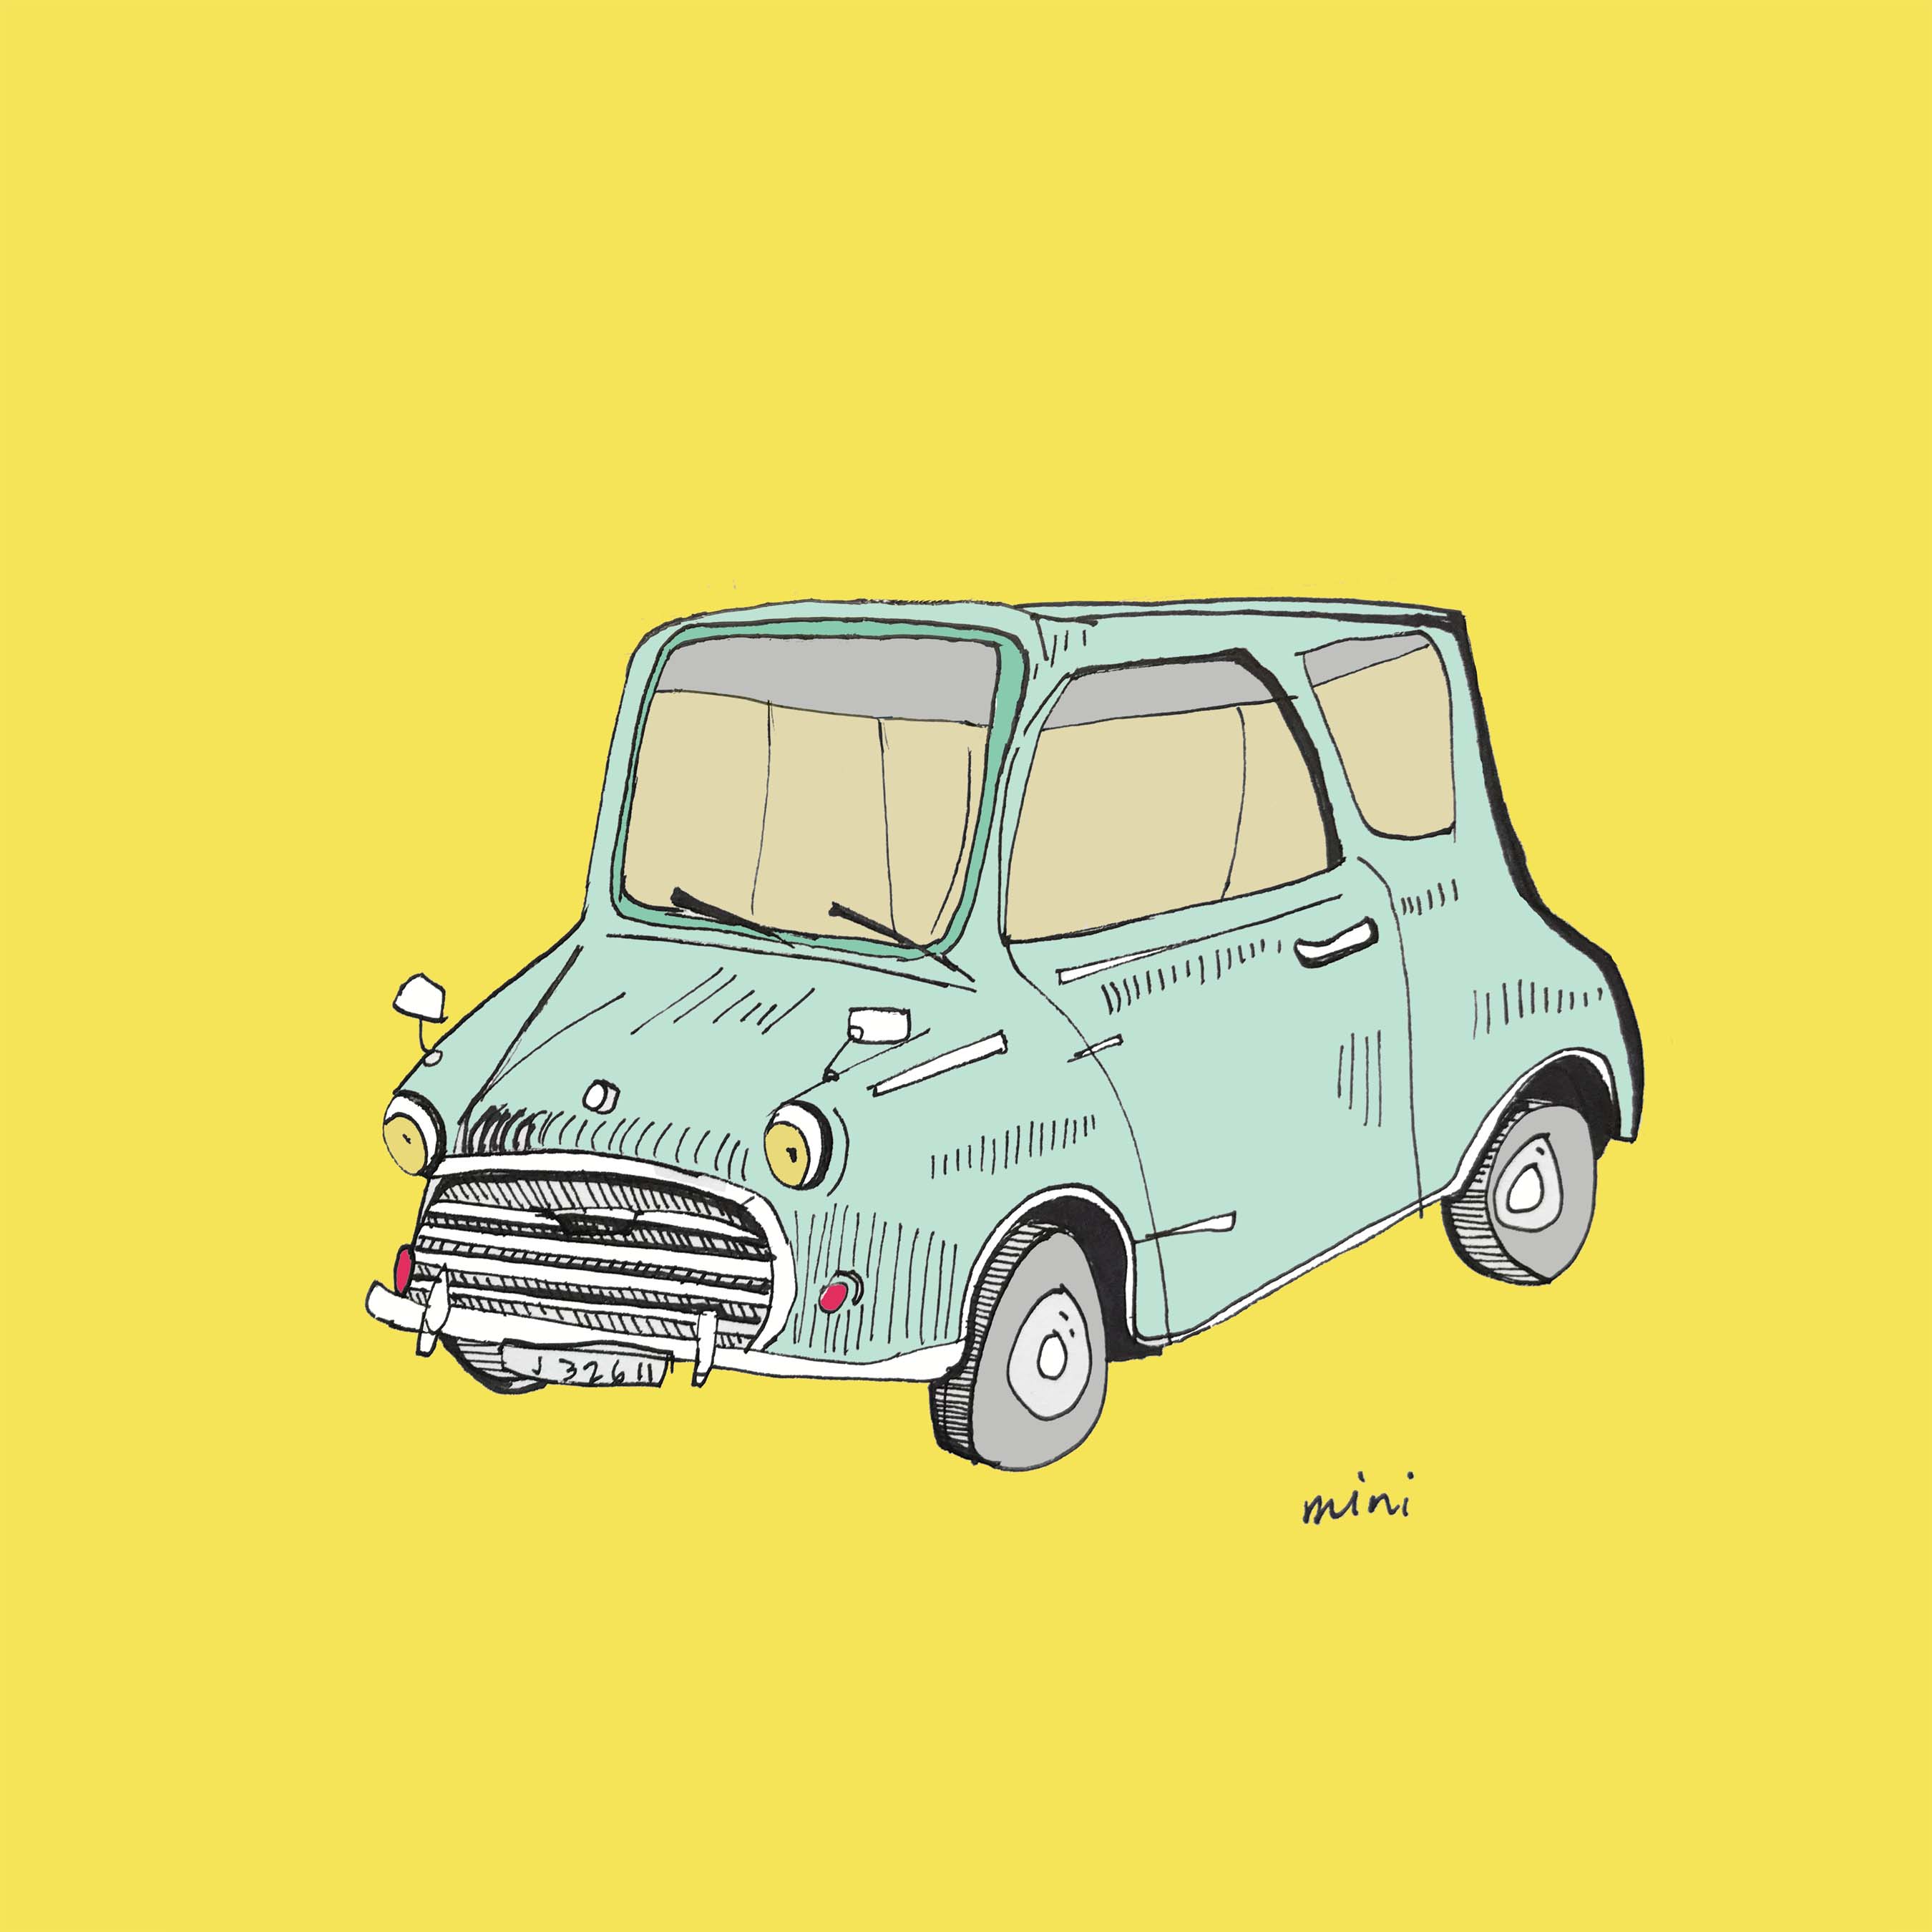 art every day number 315 mini car automobile tiny